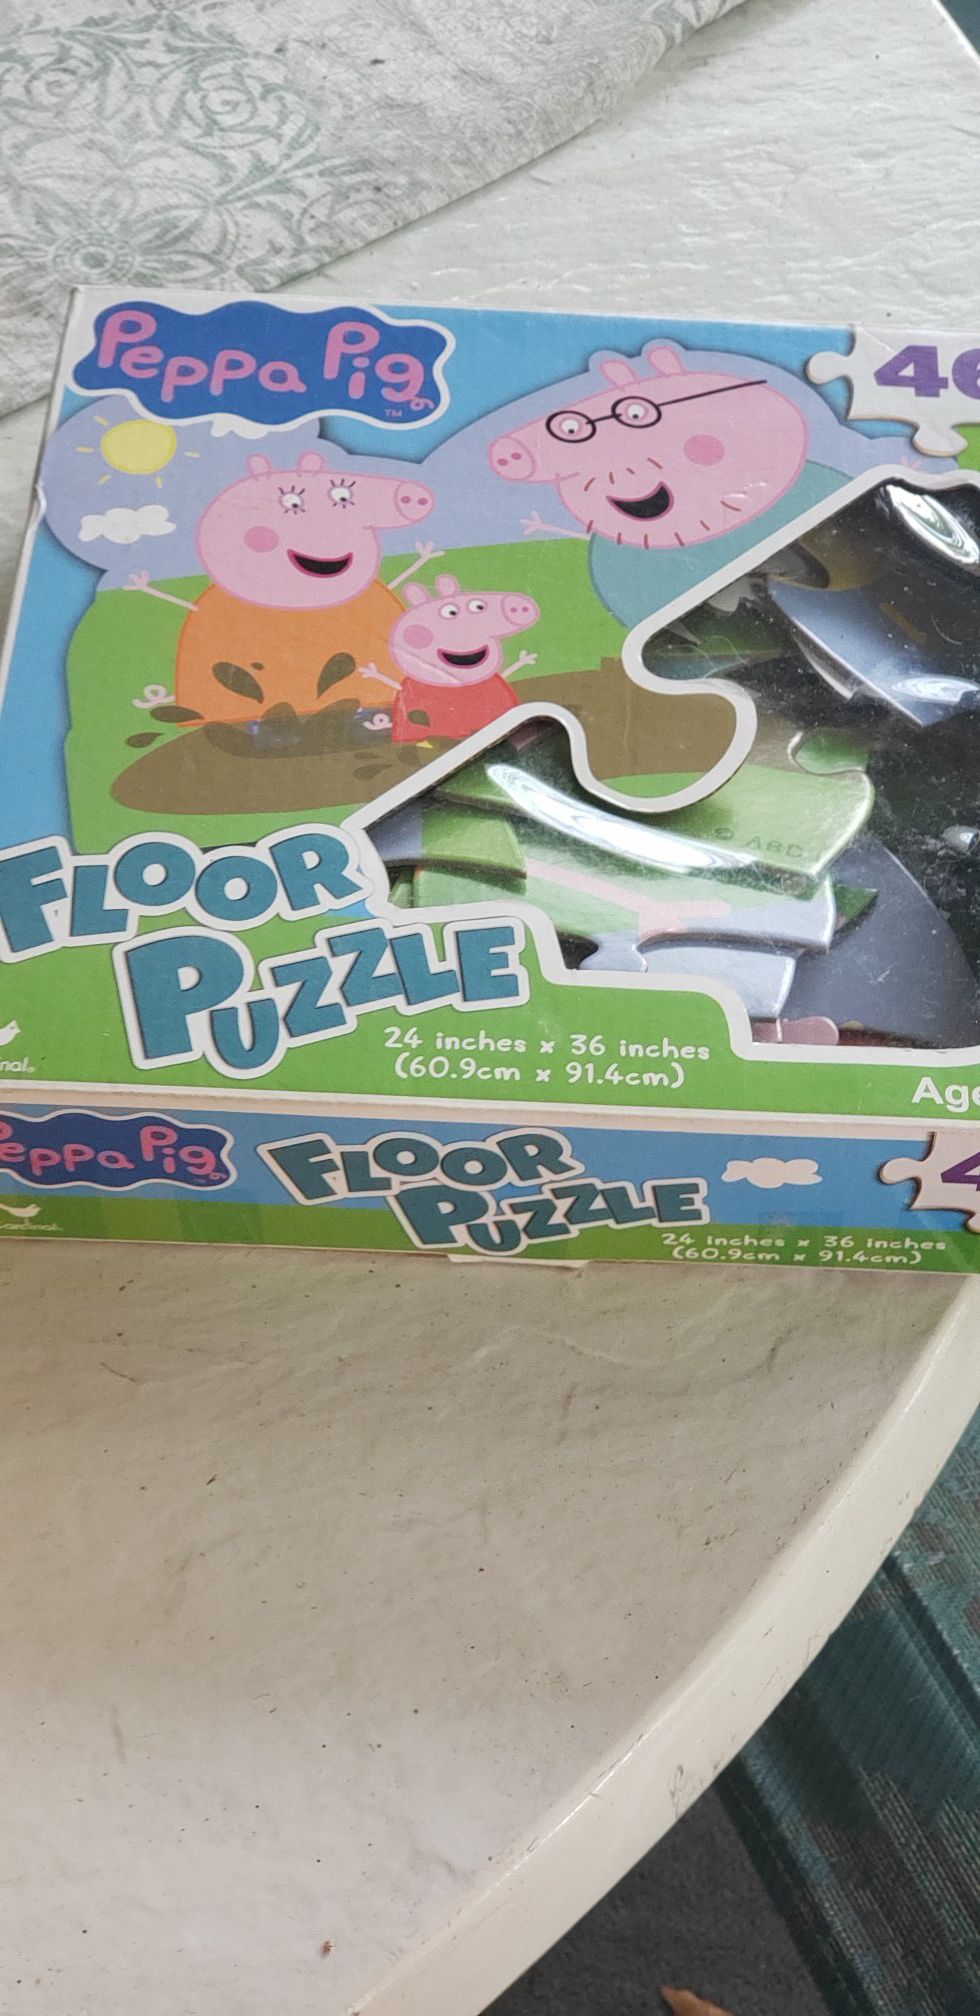 Lot puzzles, matching games & paw patrol book play